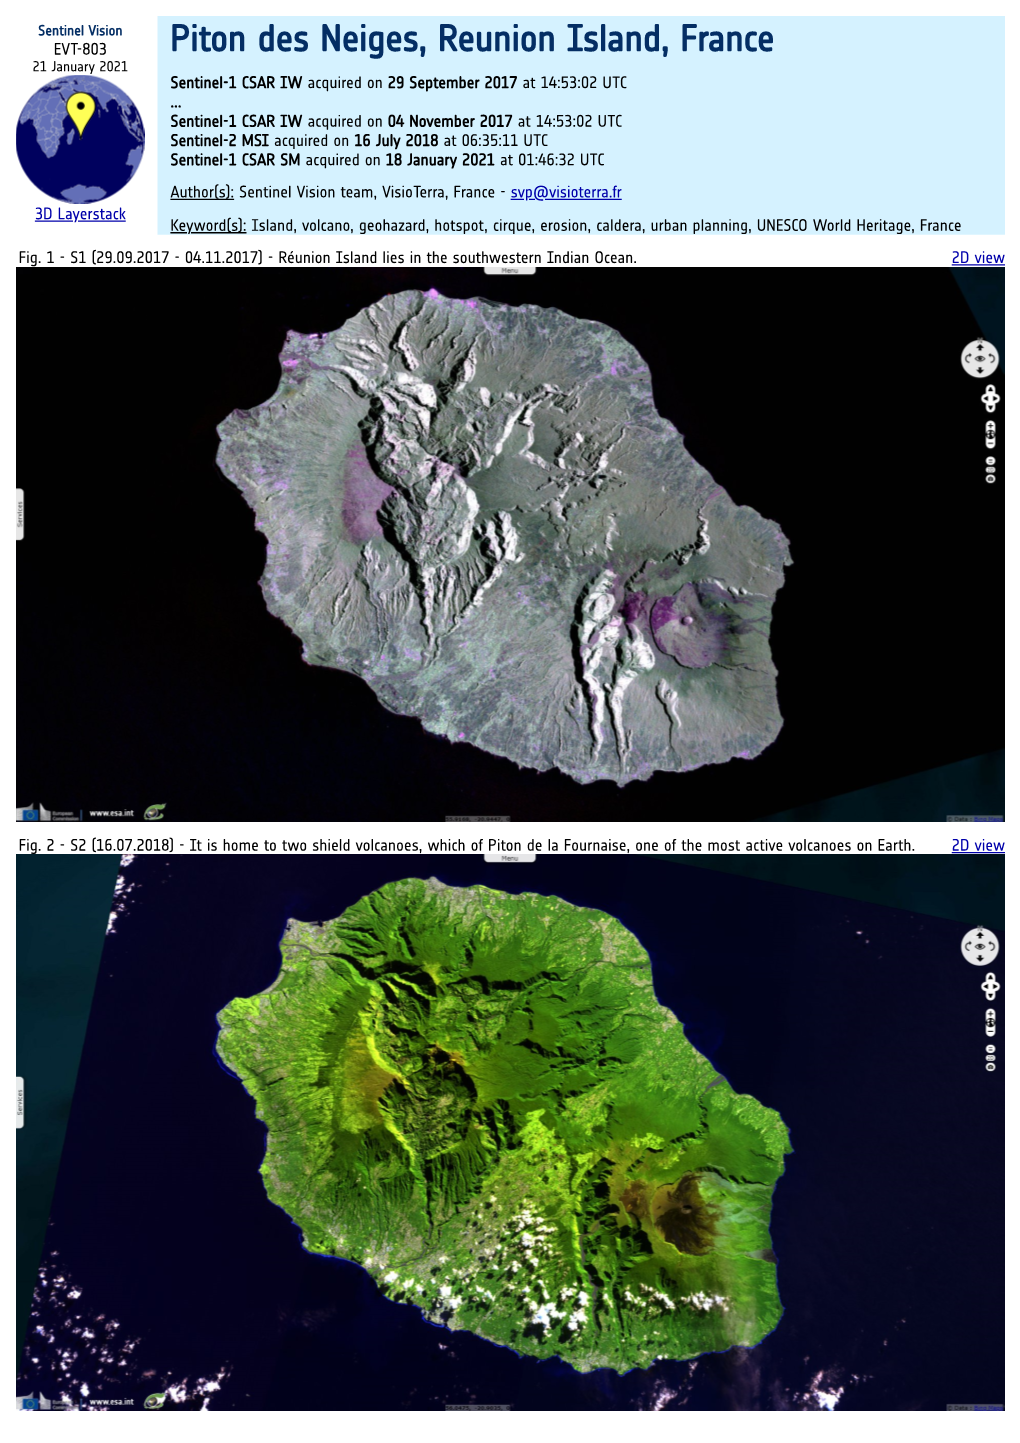 Piton Des Neiges, Reunion Island, France 21 January 2021 Sentinel-1 CSAR IW Acquired on 29 September 2017 at 14:53:02 UTC